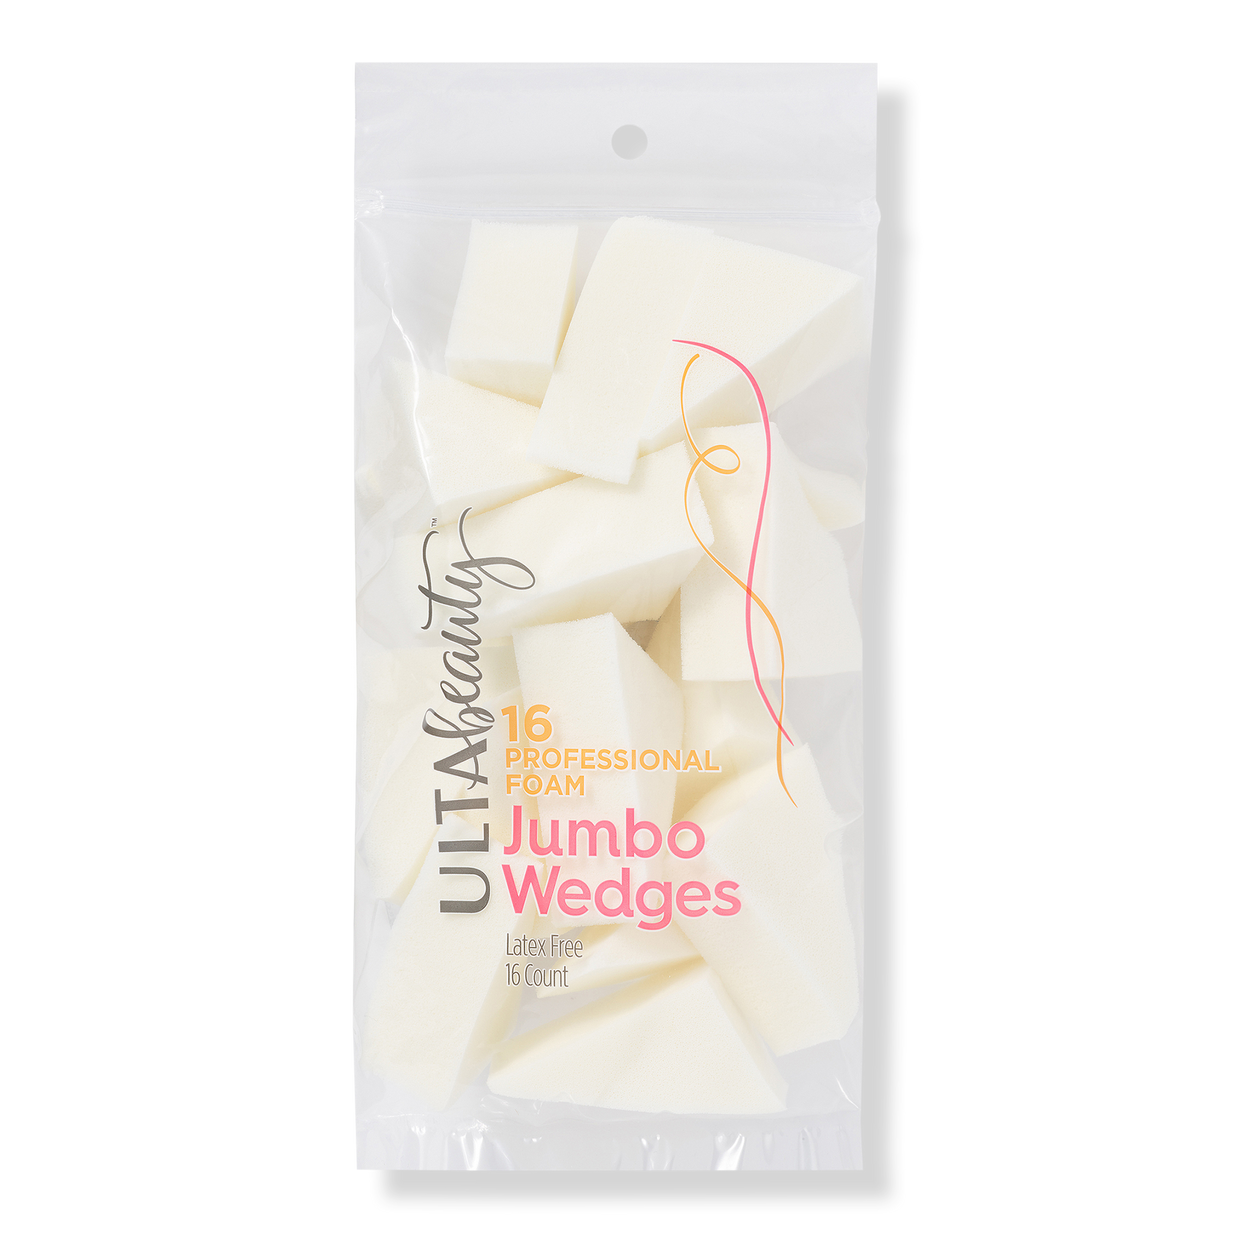 Cosmetic Makeup Wedges Sponges - Just Because Daily Essentials